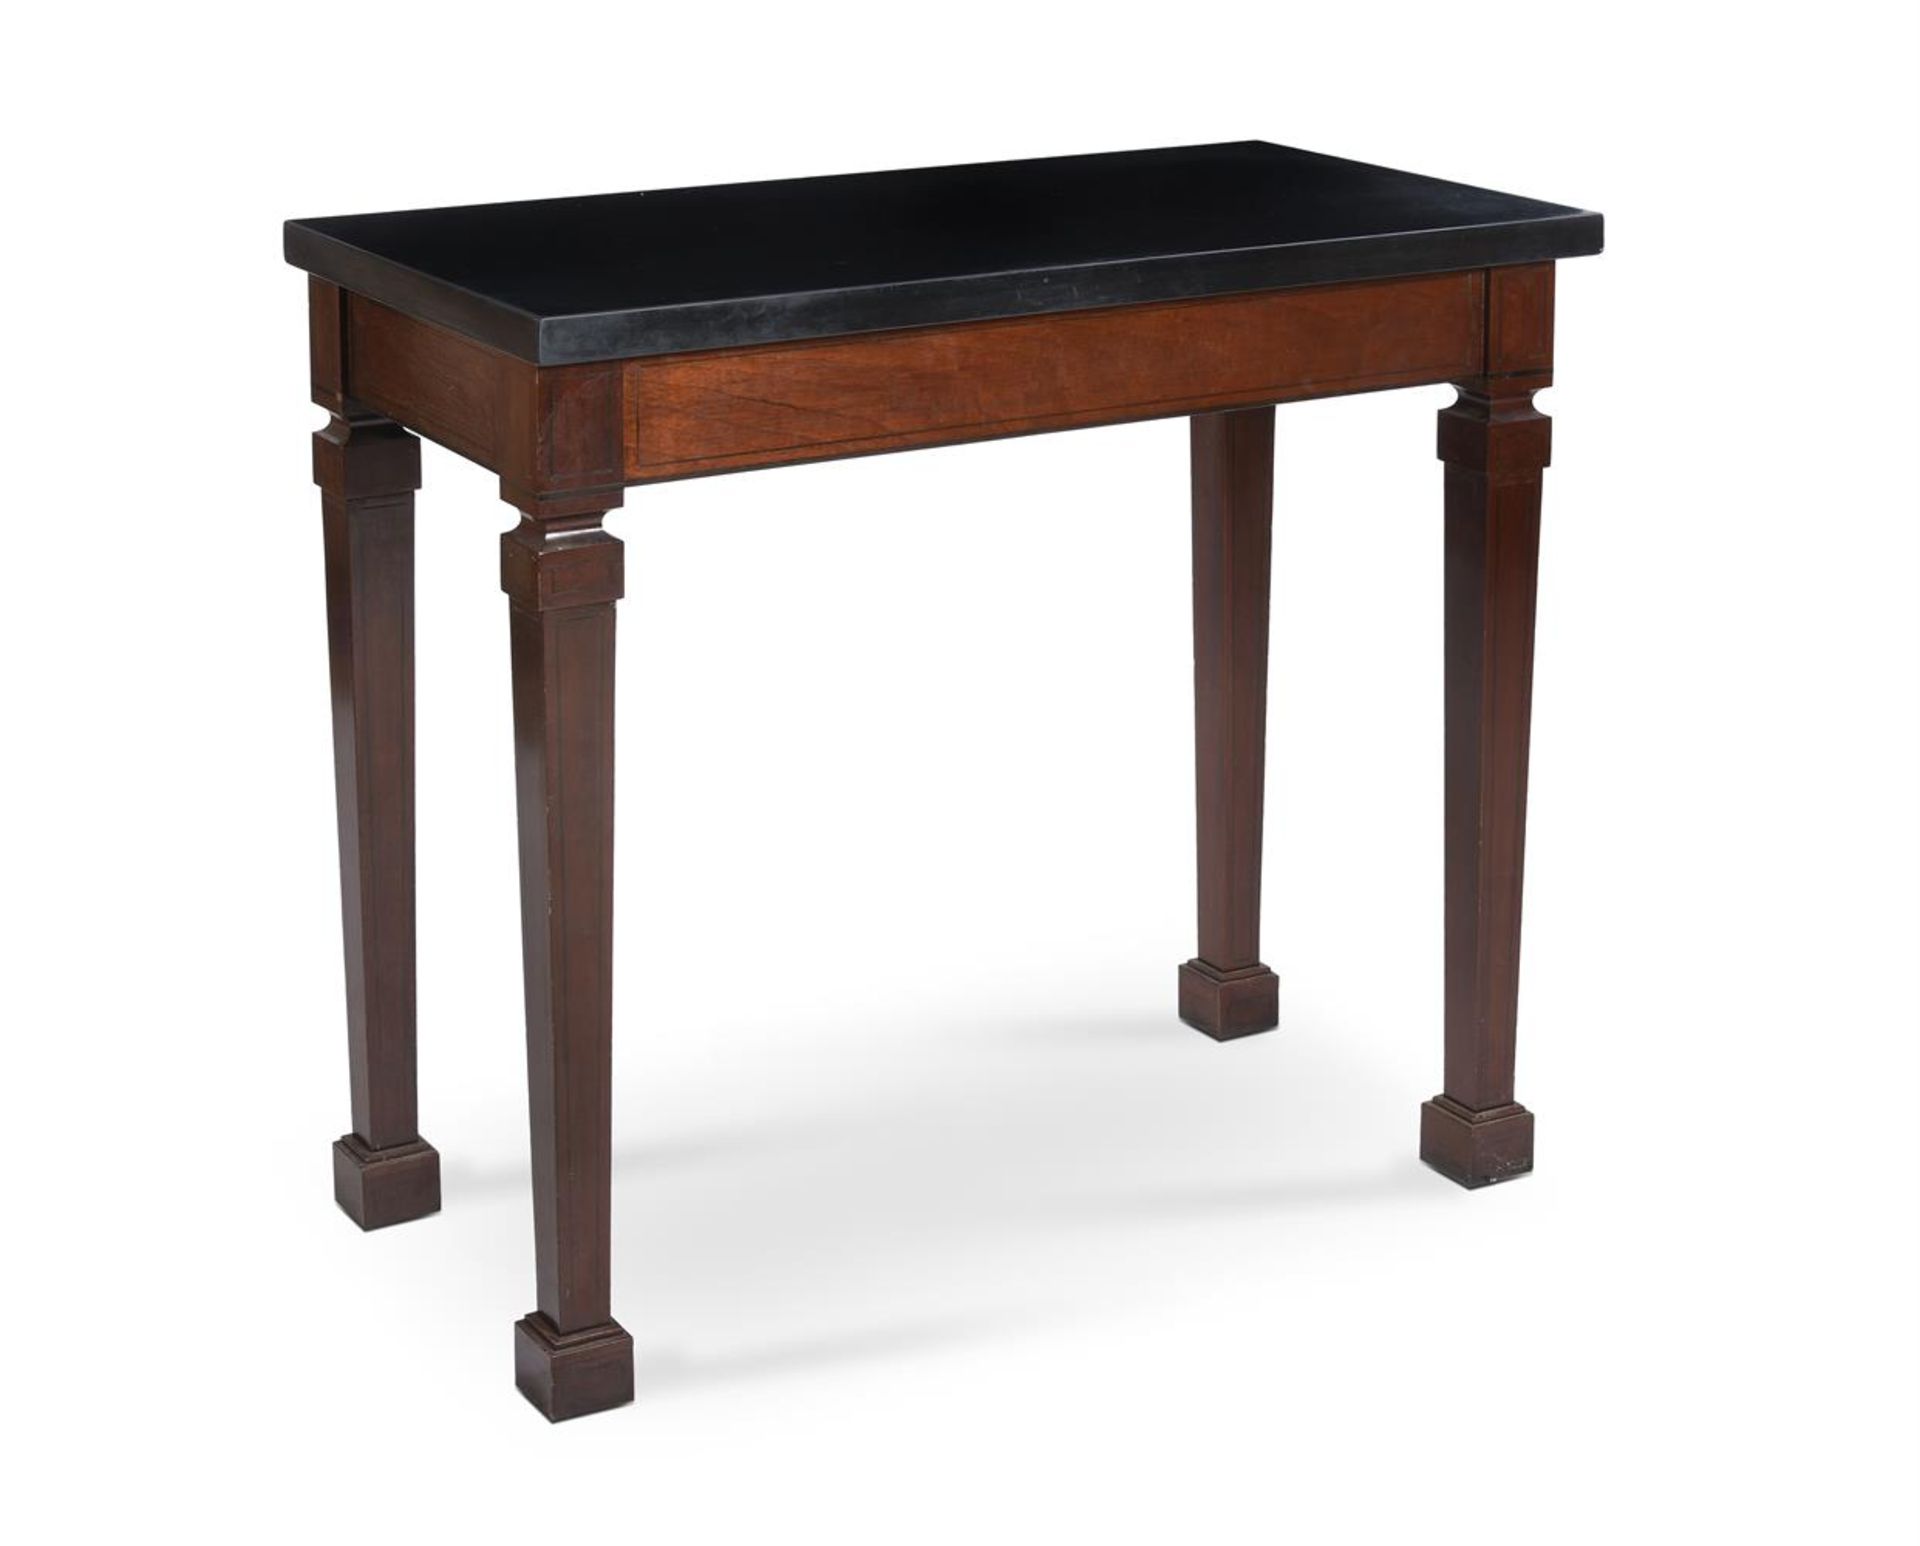 A PAIR OF MAHOGANY AND SLATE TOPPED CONSOLE TABLES BY ANOUSKA HEMPEL - Image 2 of 3